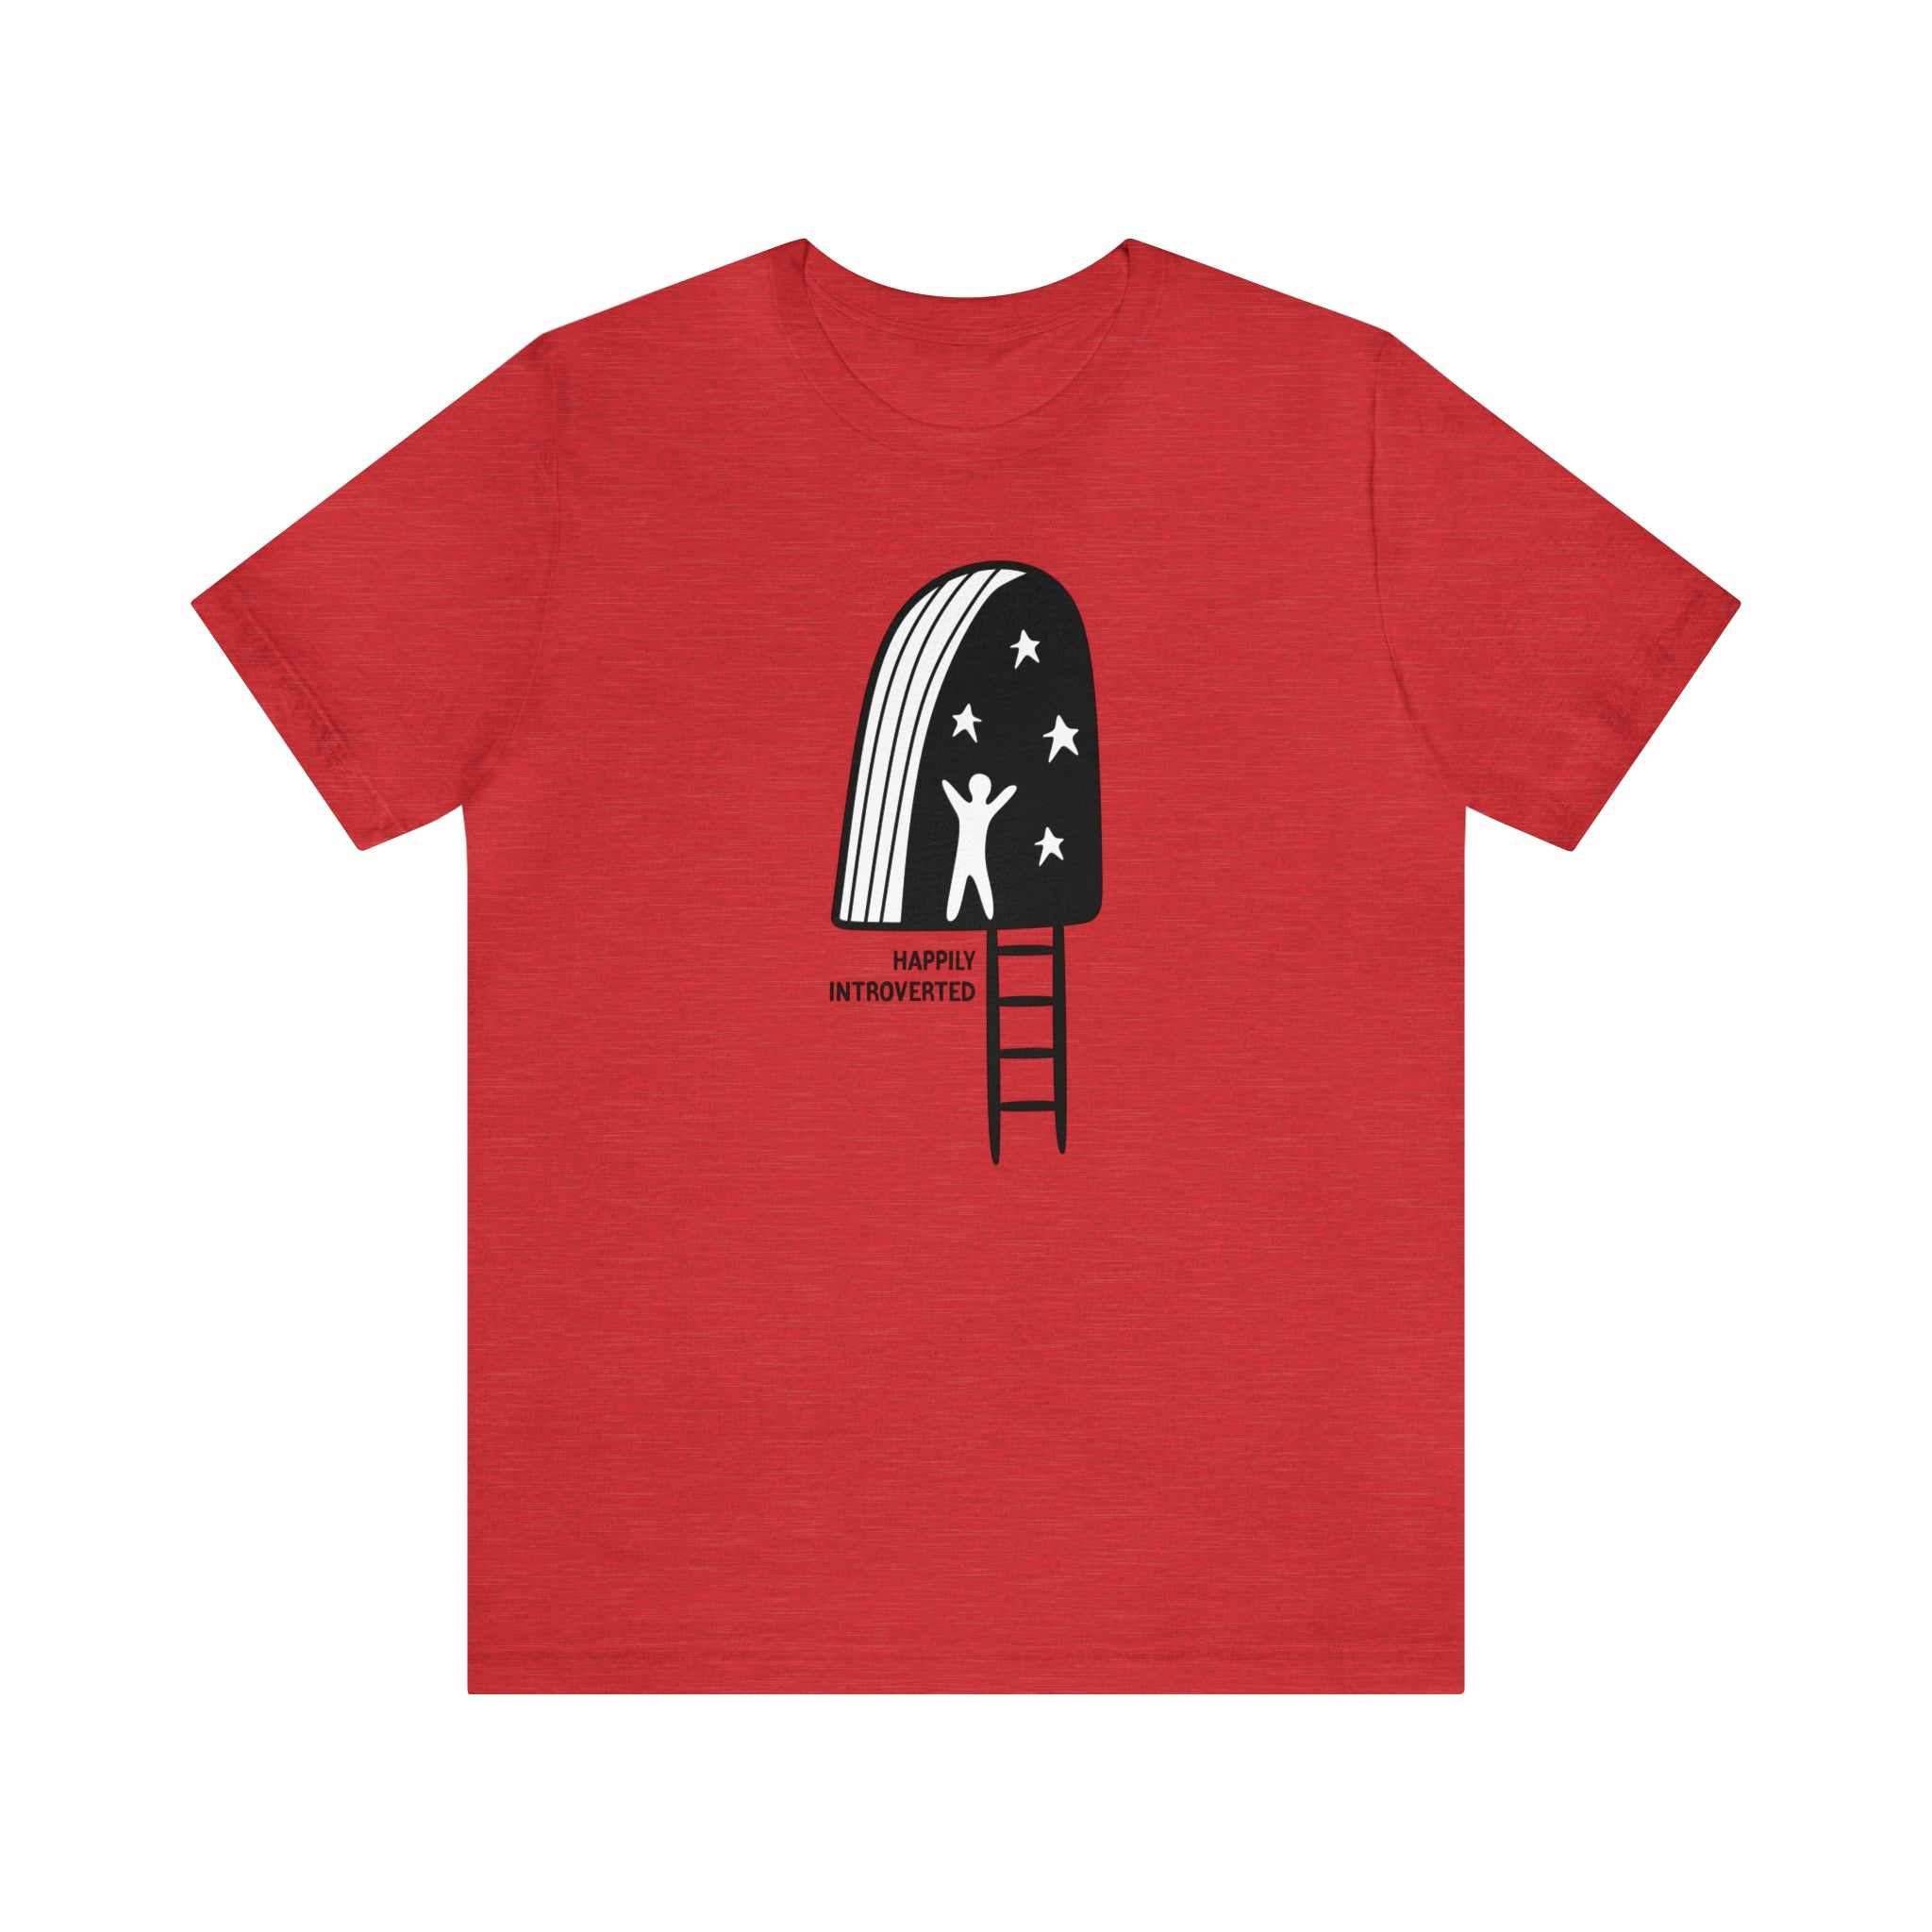 A Happily Introverted T-Shirt featuring a drawing of a man for the prideful individual.